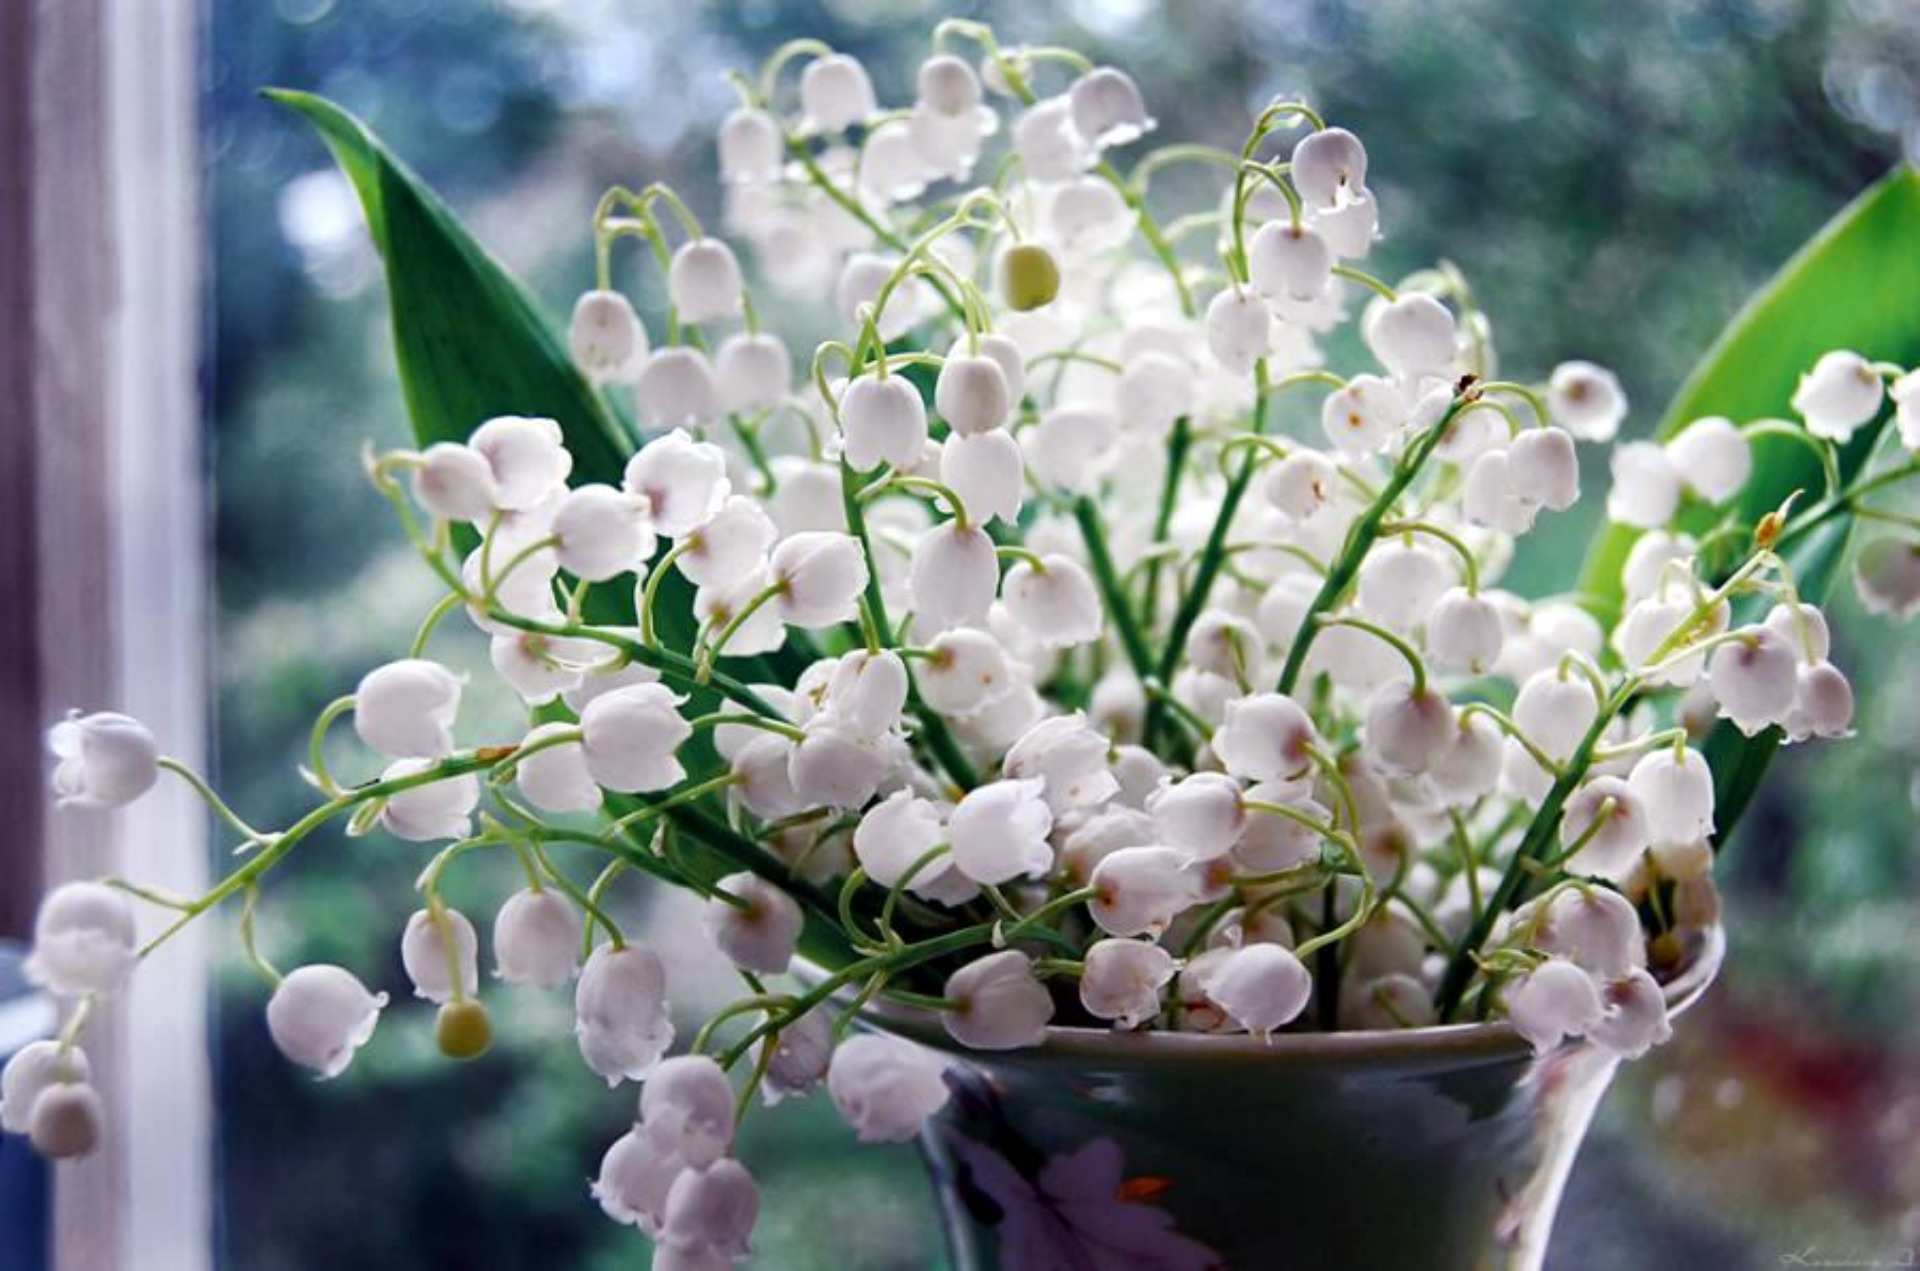 lily of the valley, man made, flower, white flower